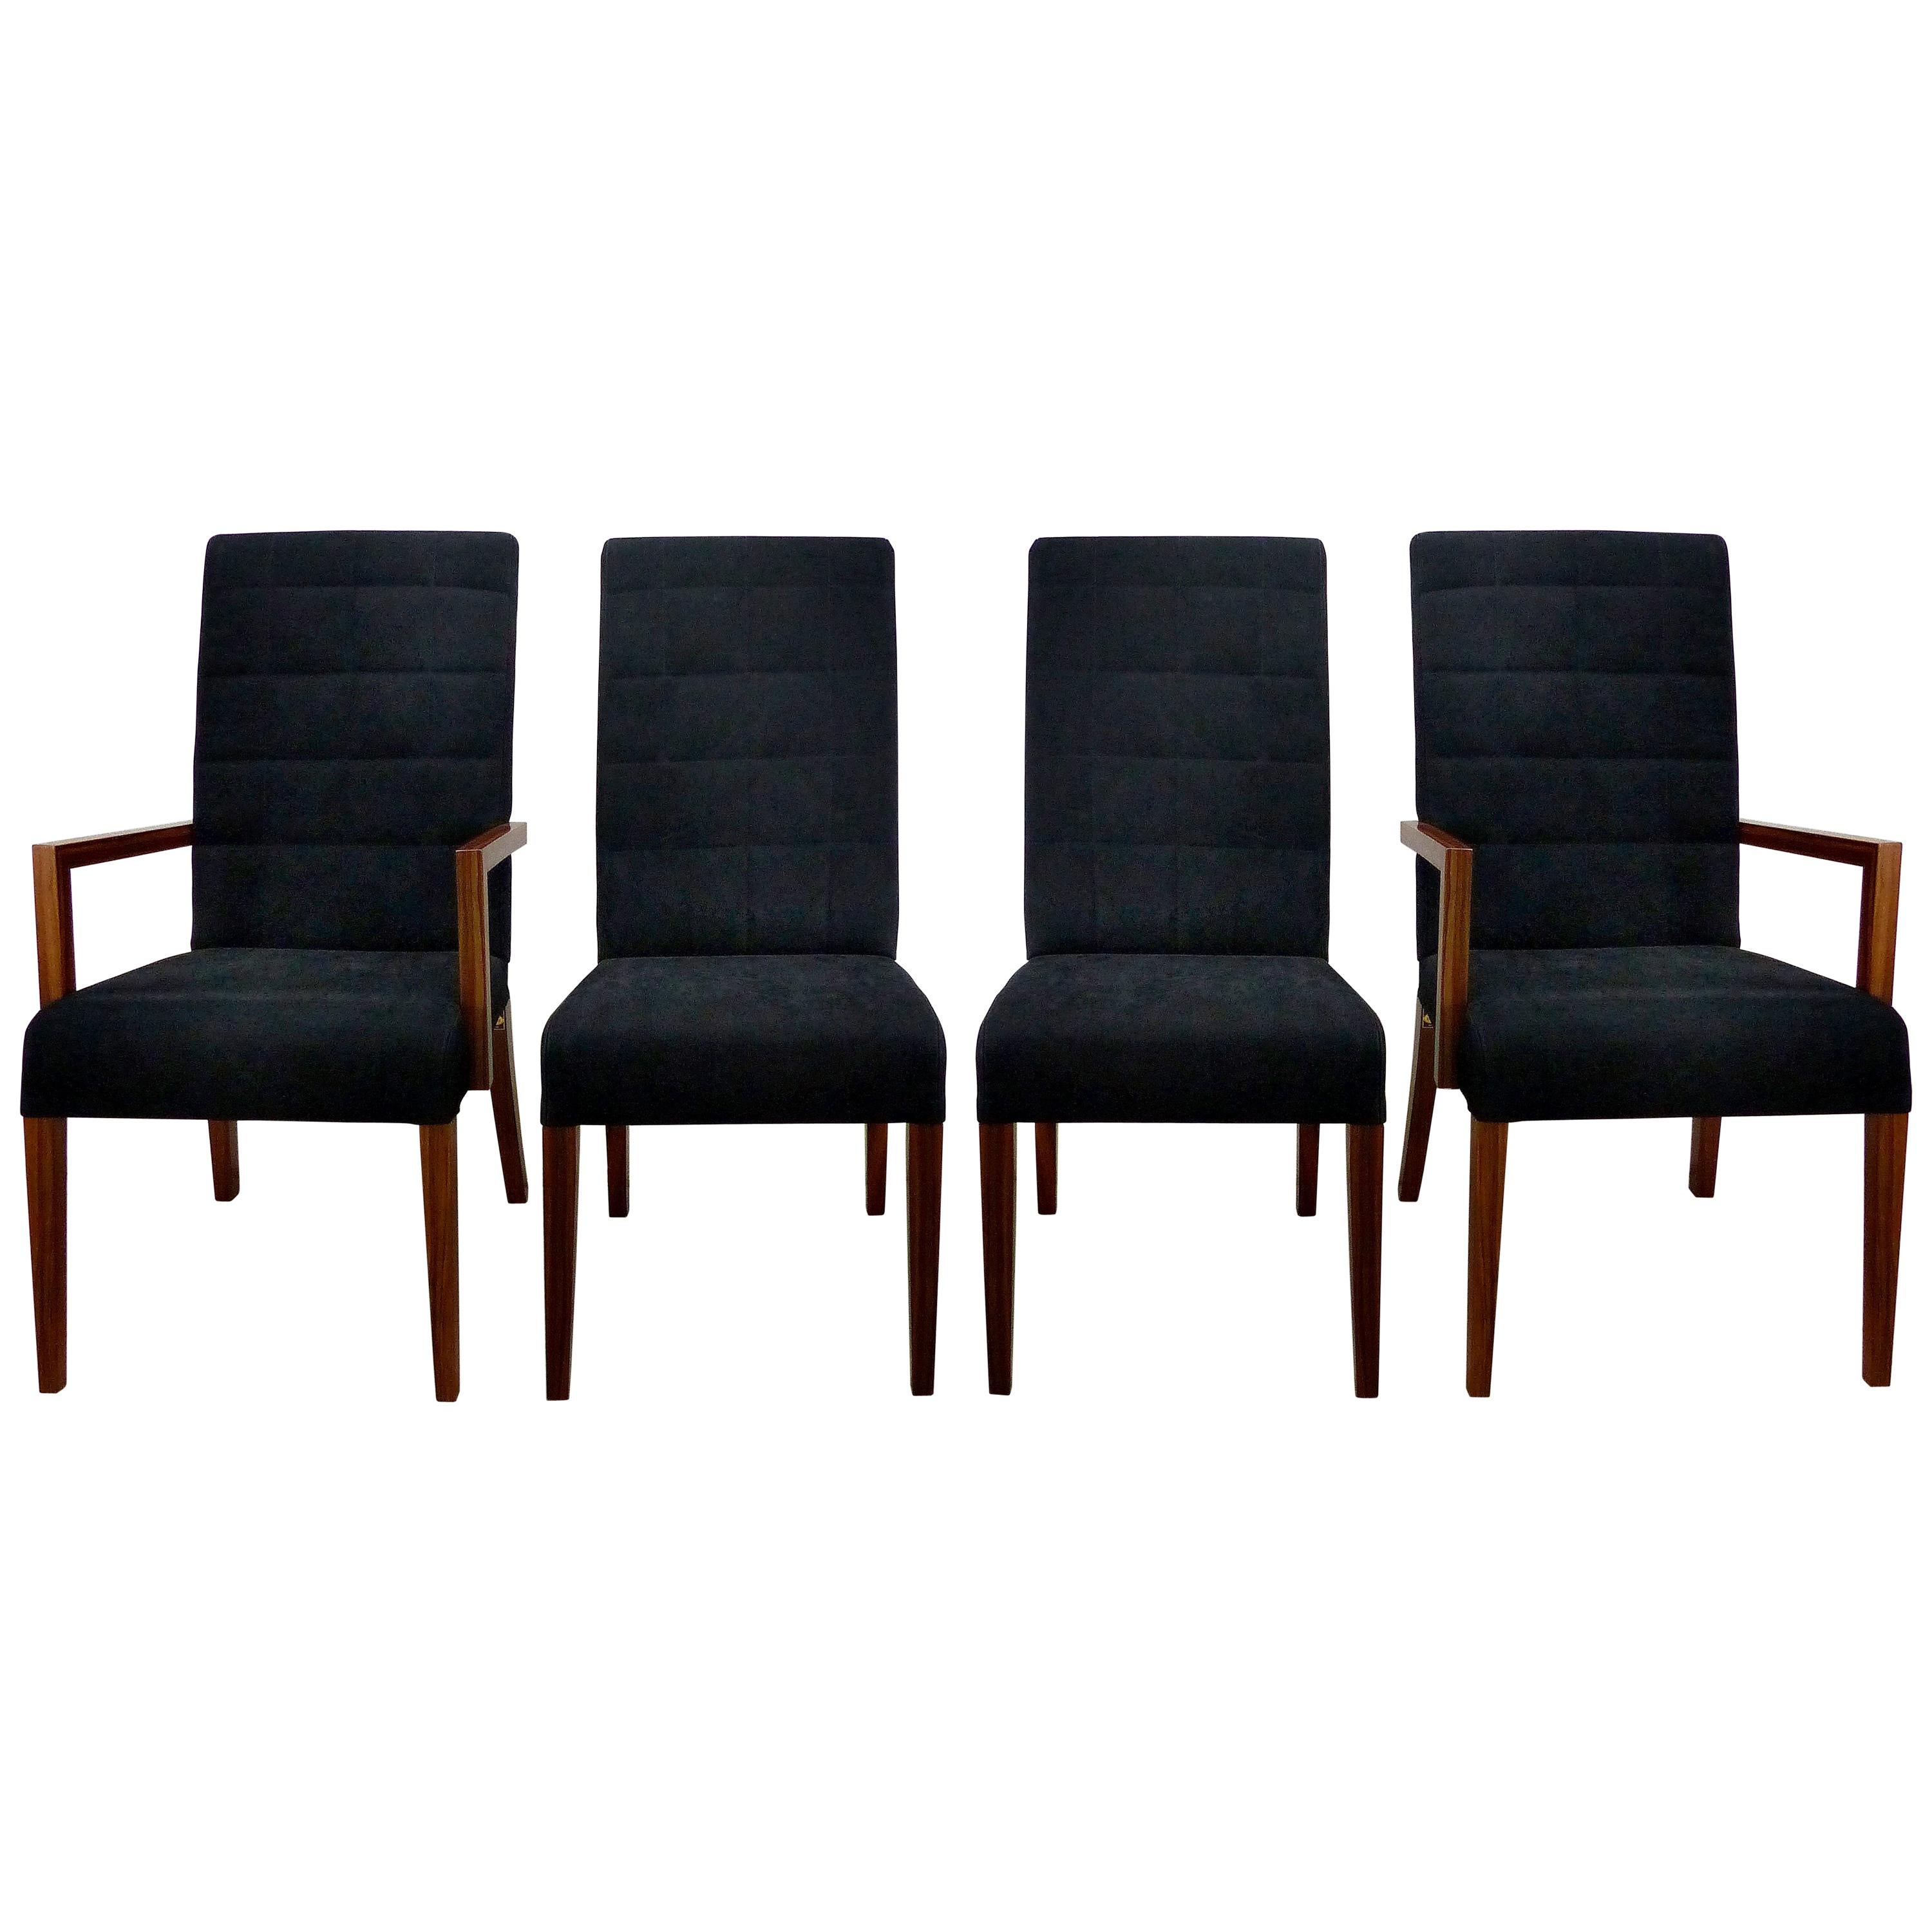 Mobilidea Suede Leather Dining Room Chairs Set of 8 by Studio Sigla Midcentury For Sale